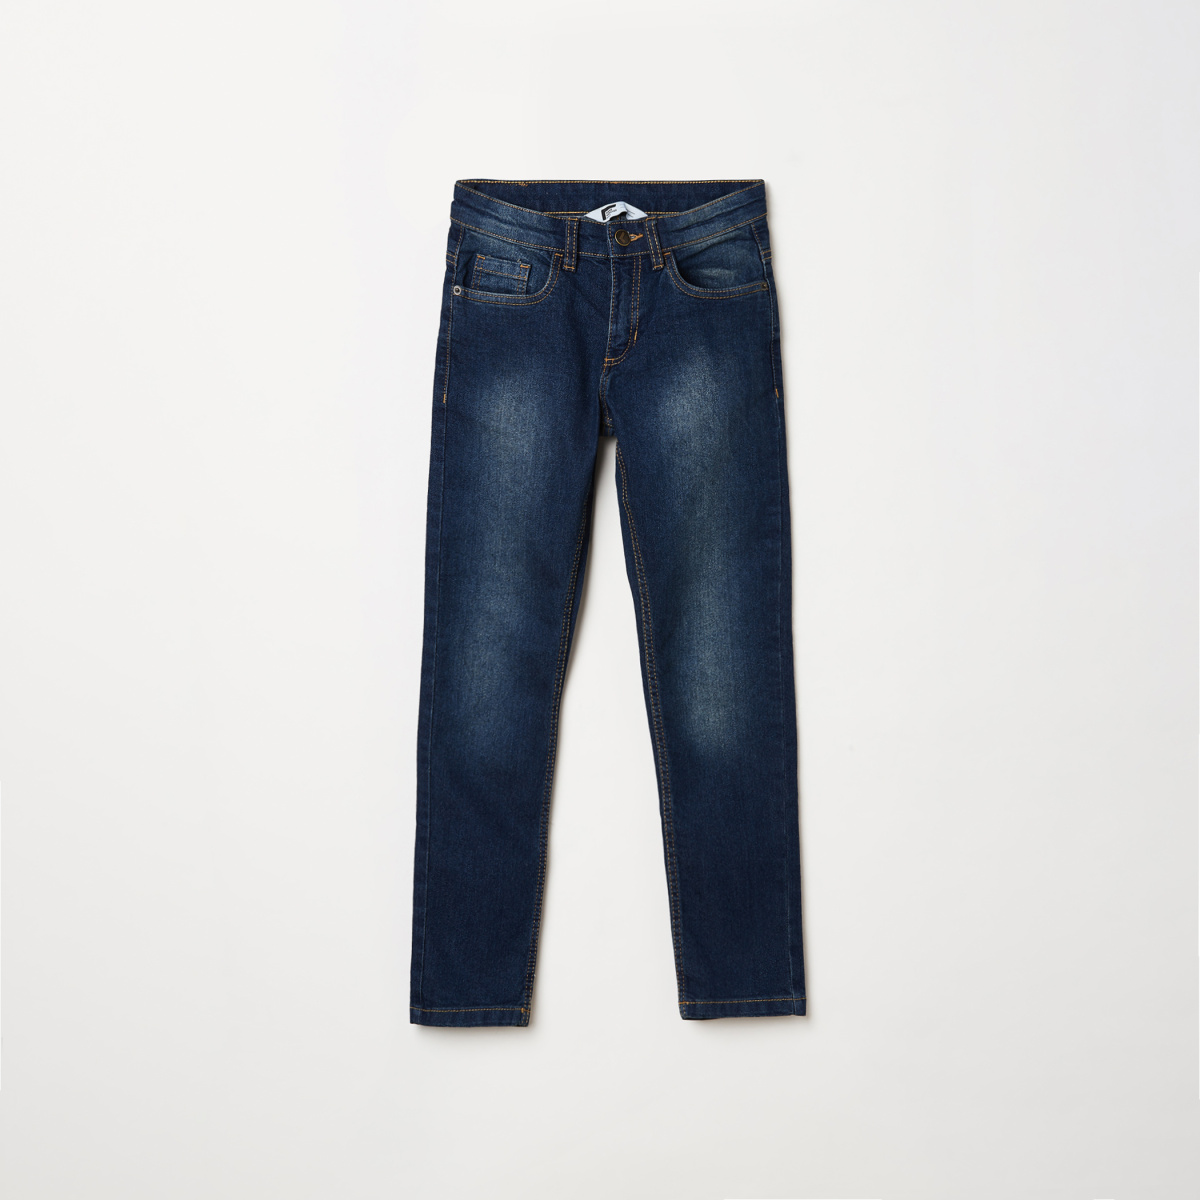 FAME FOREVER YOUNG Boys Stonewashed Slim Fit Jeans